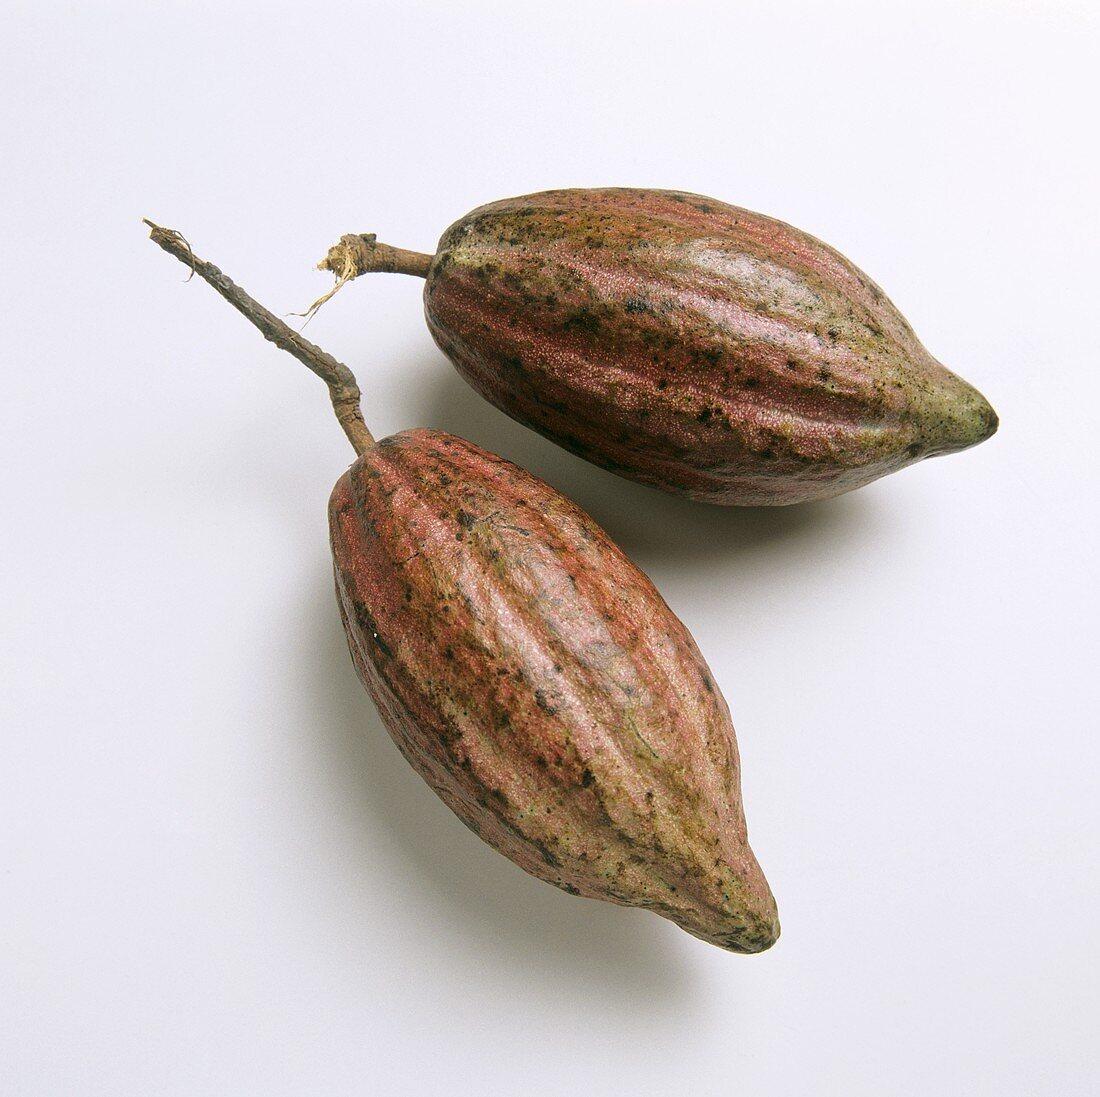 Two cocoa beans on a white background